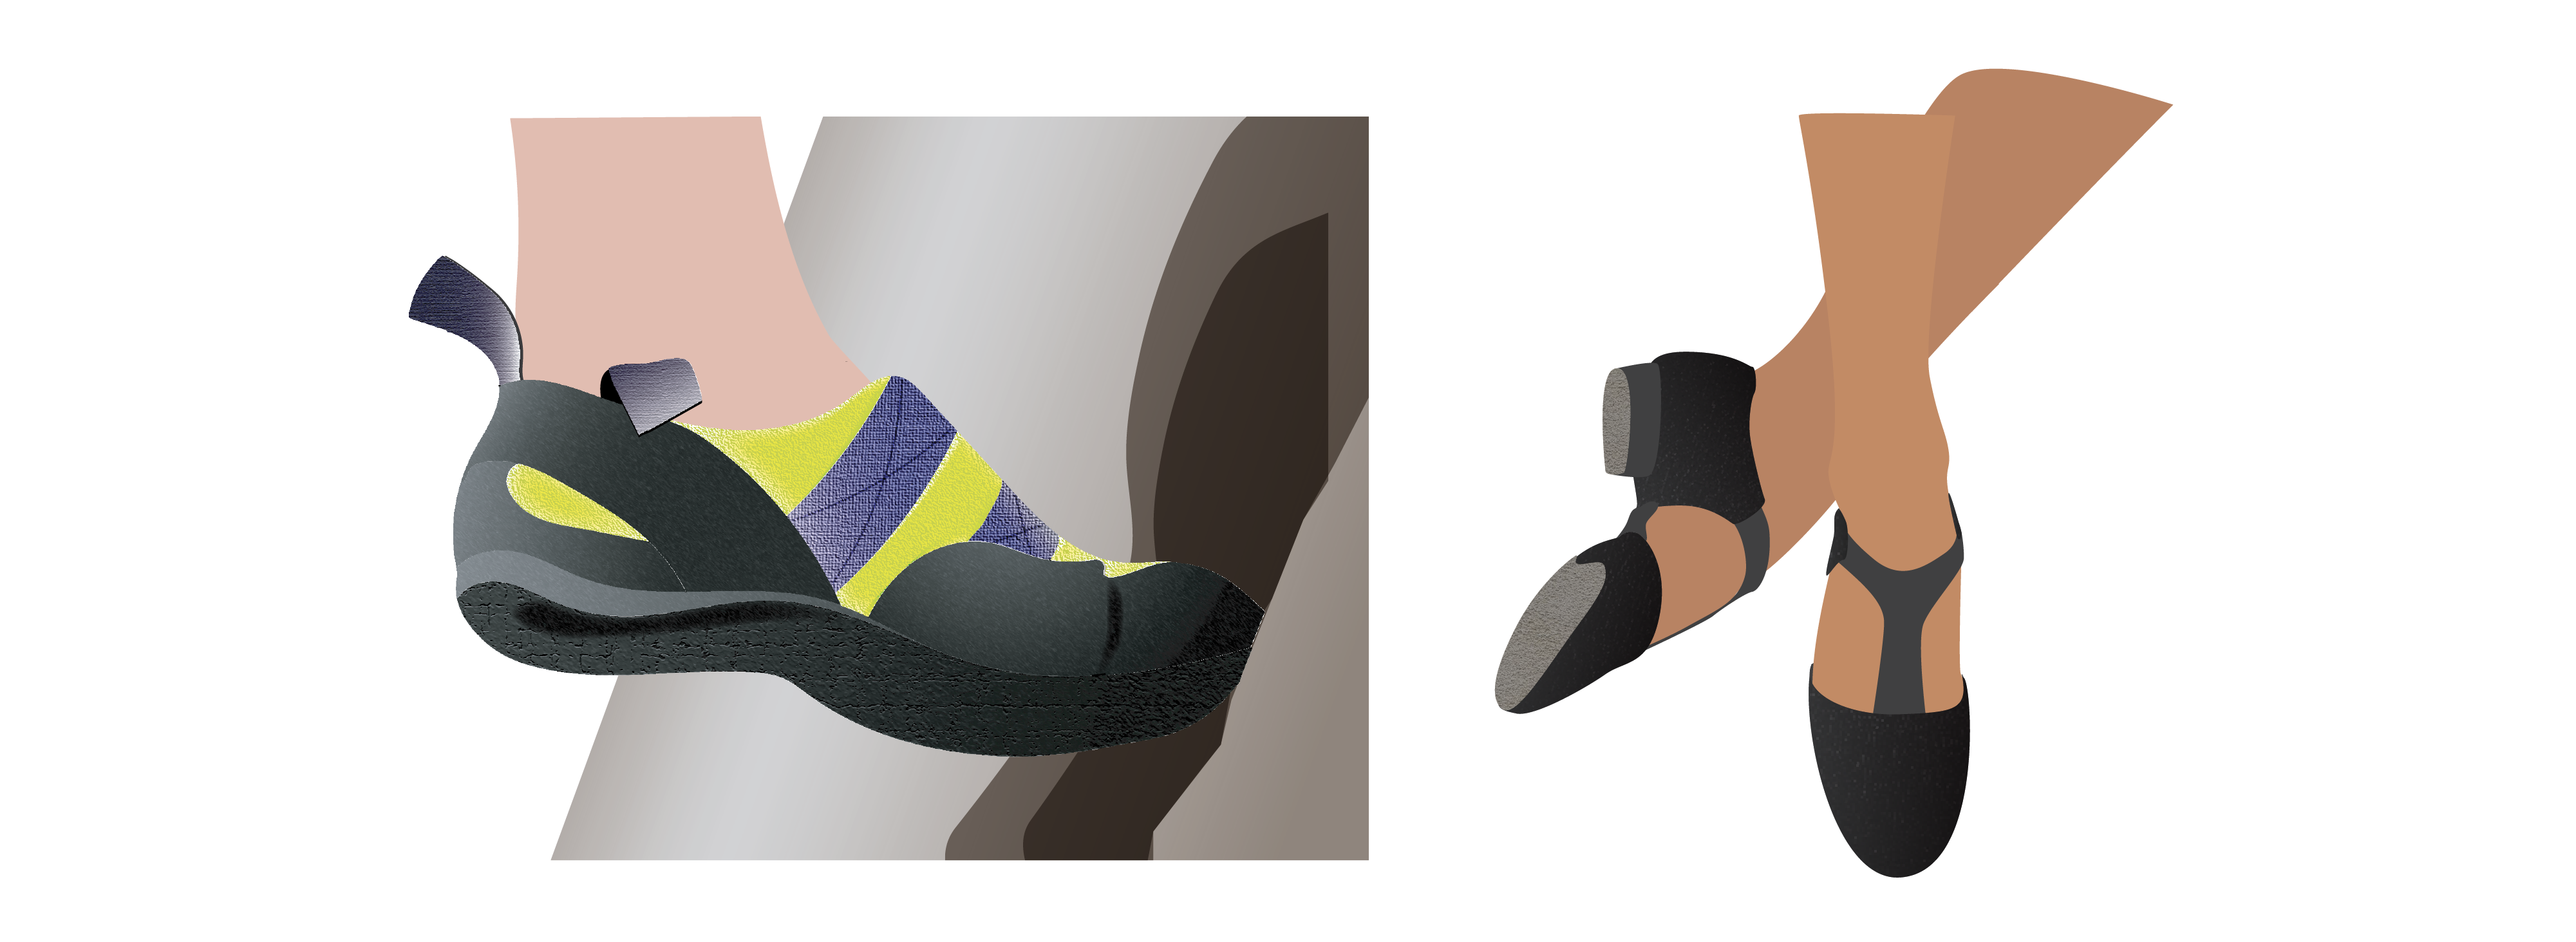 On the left, a foot with a climbing show hooks into a divet in the wall. On the right, a pair of feet with black tap shoes.